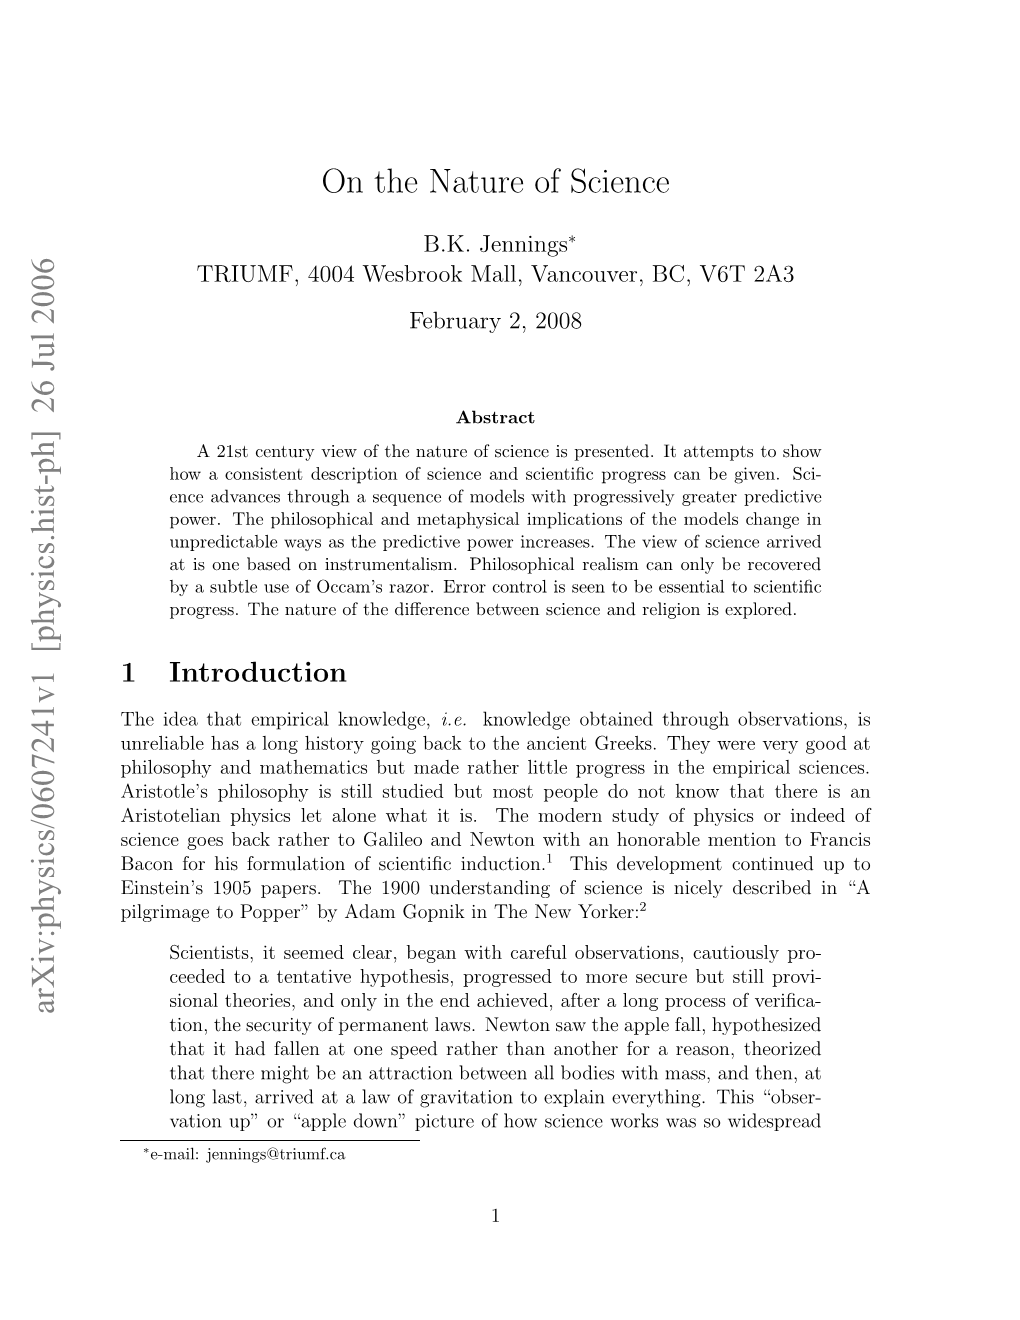 [Physics.Hist-Ph] 26 Jul 2006 on the Nature of Science